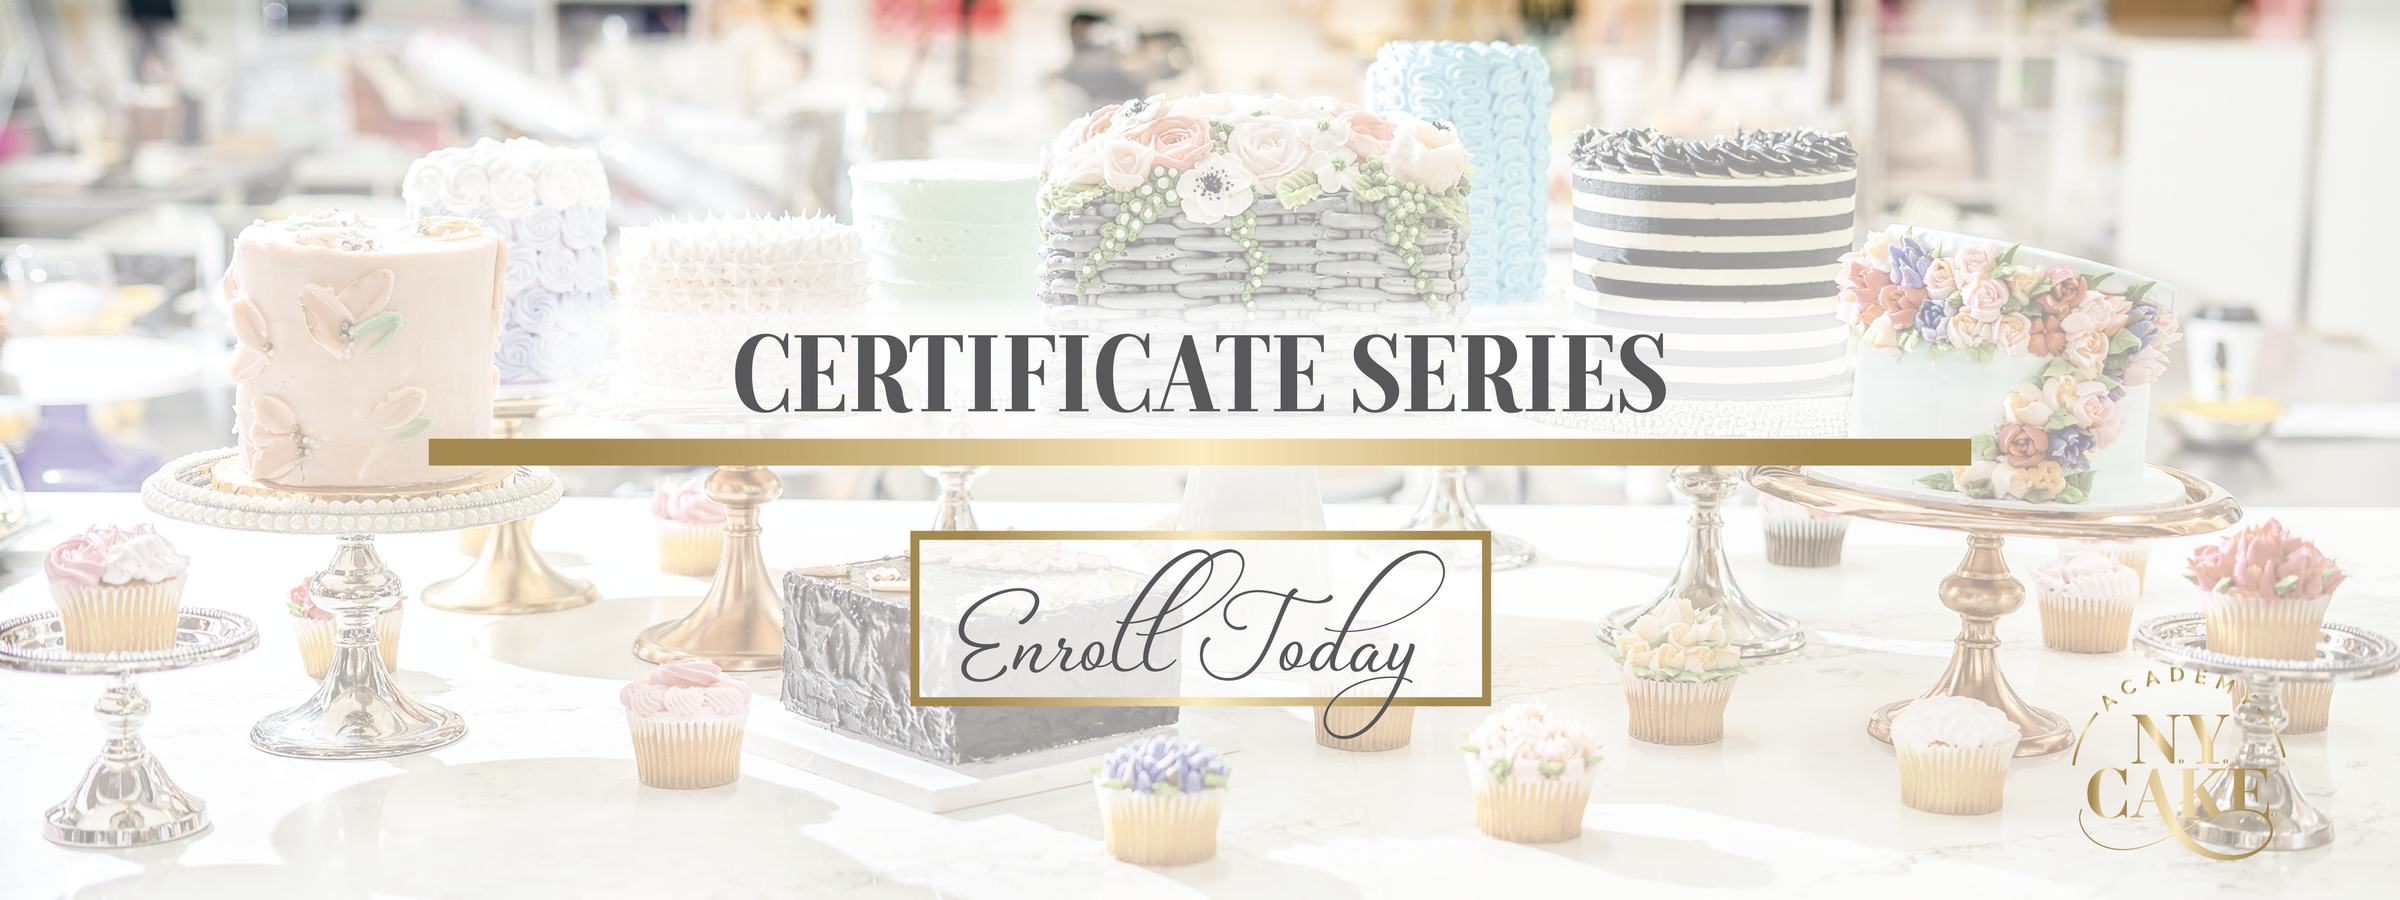 NY Cake Academy | Certificate Series | New York's Premier Cake Decorating Classes And Events